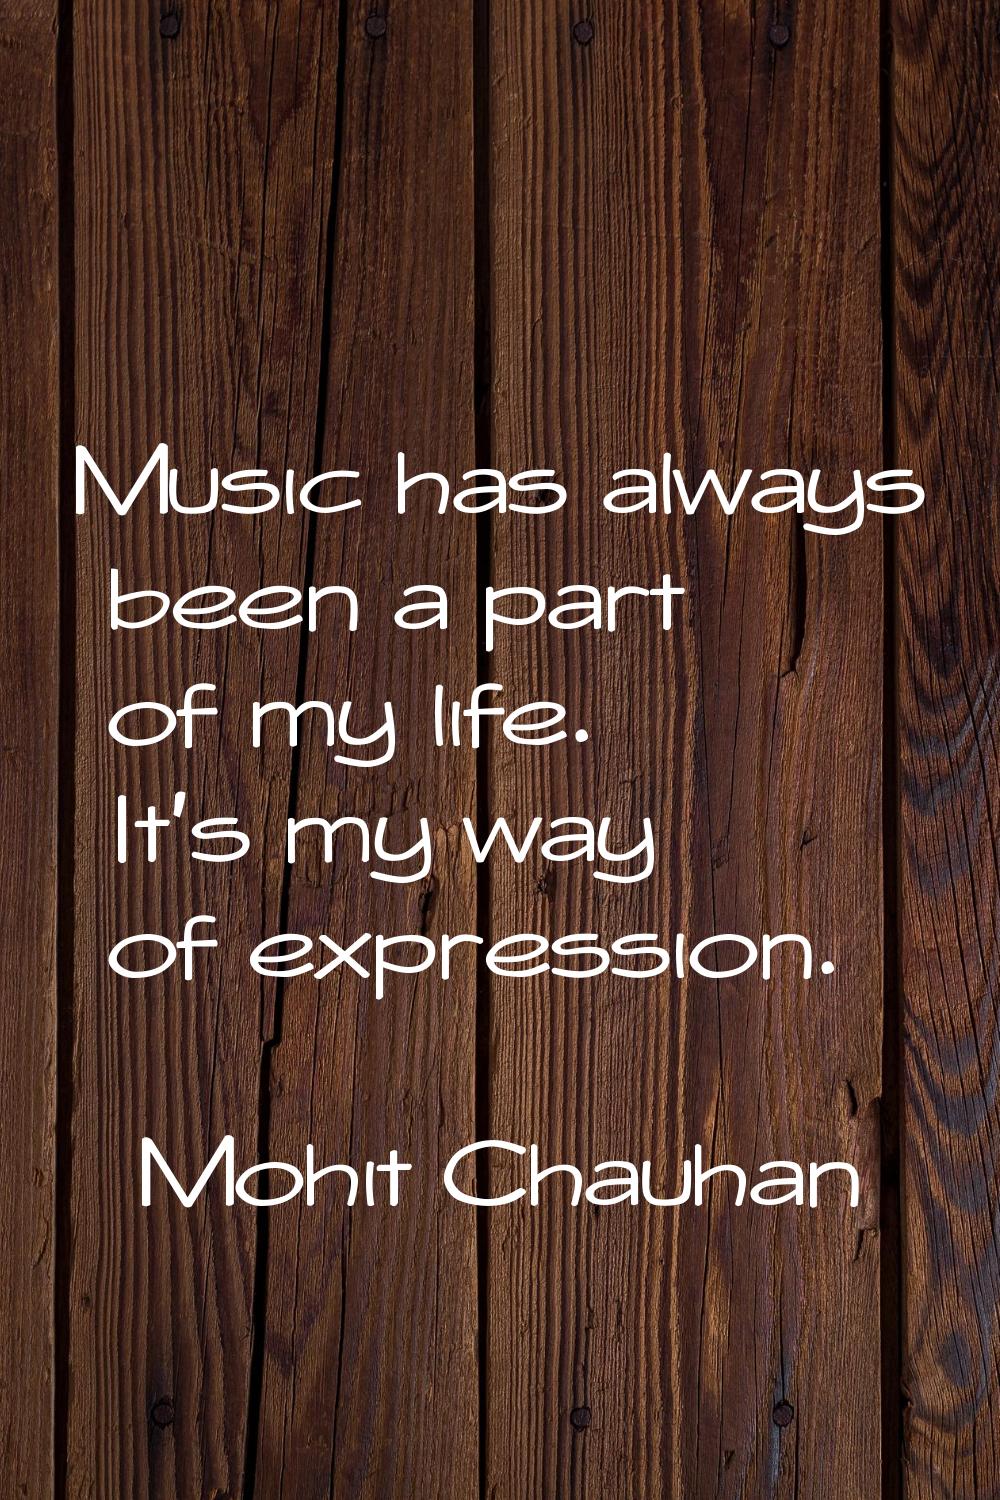 Music has always been a part of my life. It's my way of expression.